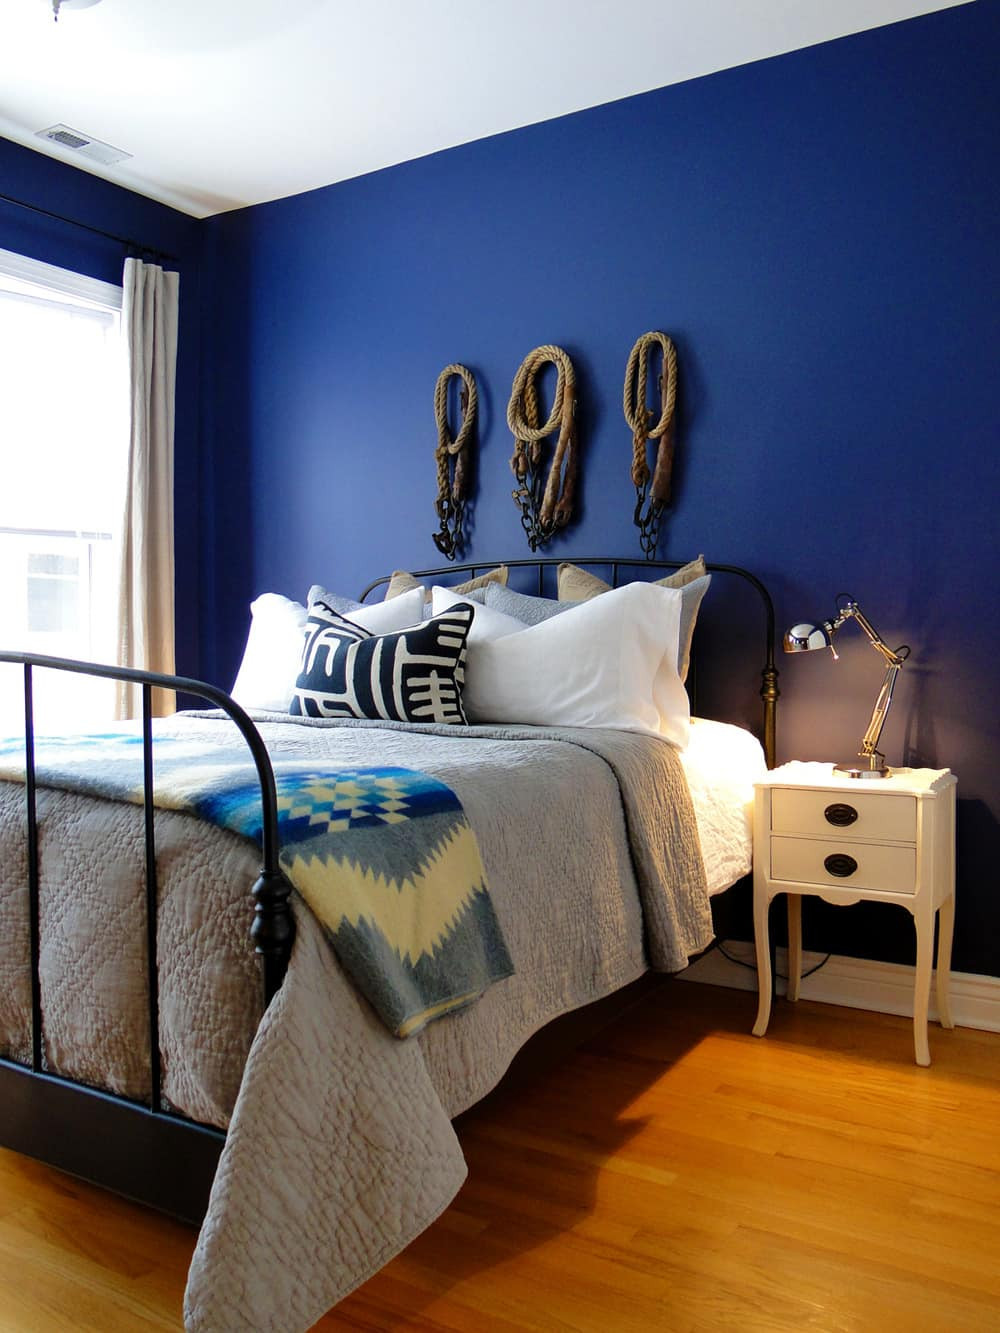 Pretty Paint Colors For Bedrooms
 20 Bold & Beautiful Blue Wall Paint Colors